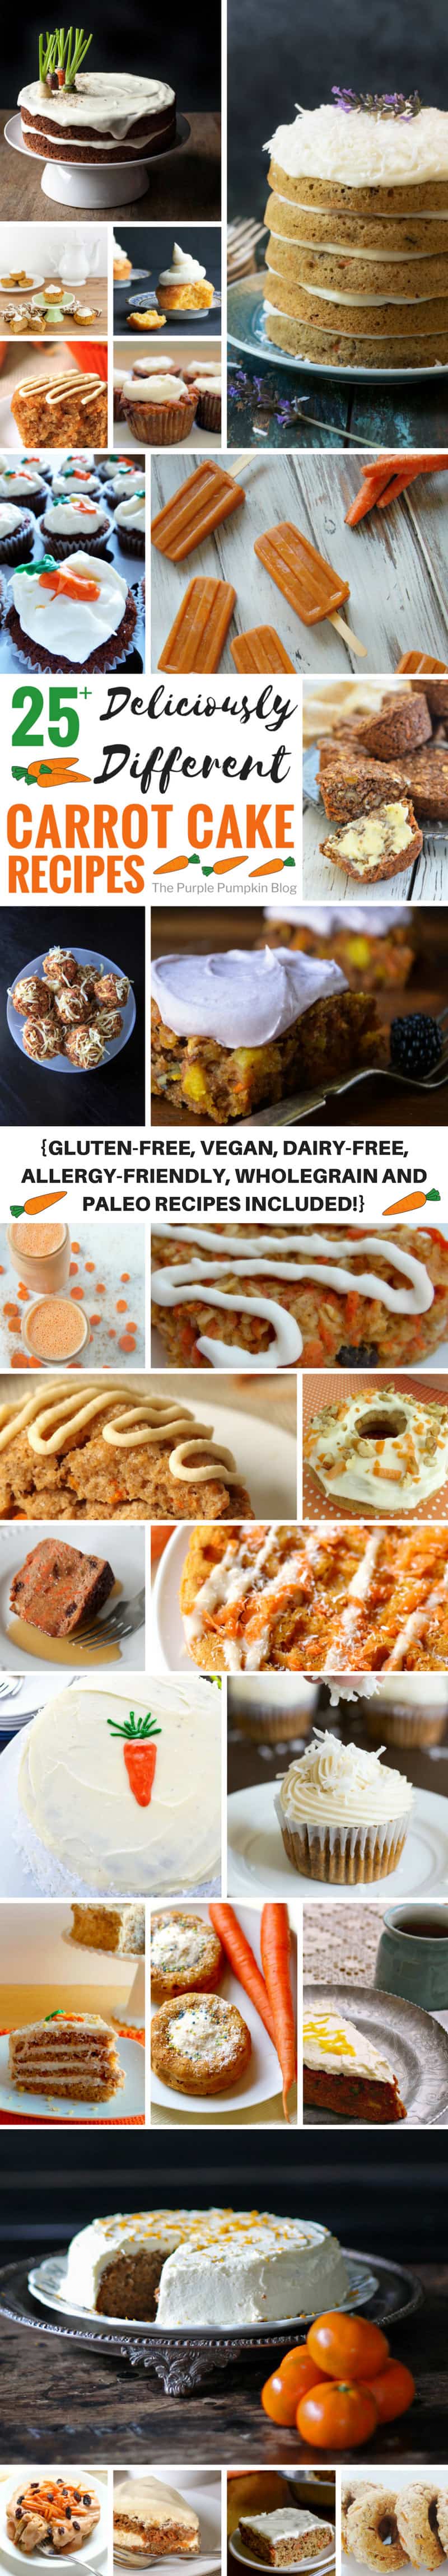 25 Deliciously Different Carrot Cake Recipes! Including cupcakes, muffins, energy bites, and even popsicles! There are also carrot cake recipes that are gluten-free, vegan, dairy-free, allergy-friendly, wholegrain and paleo - so there is a carrot cake recipe for everyone in this roundup!